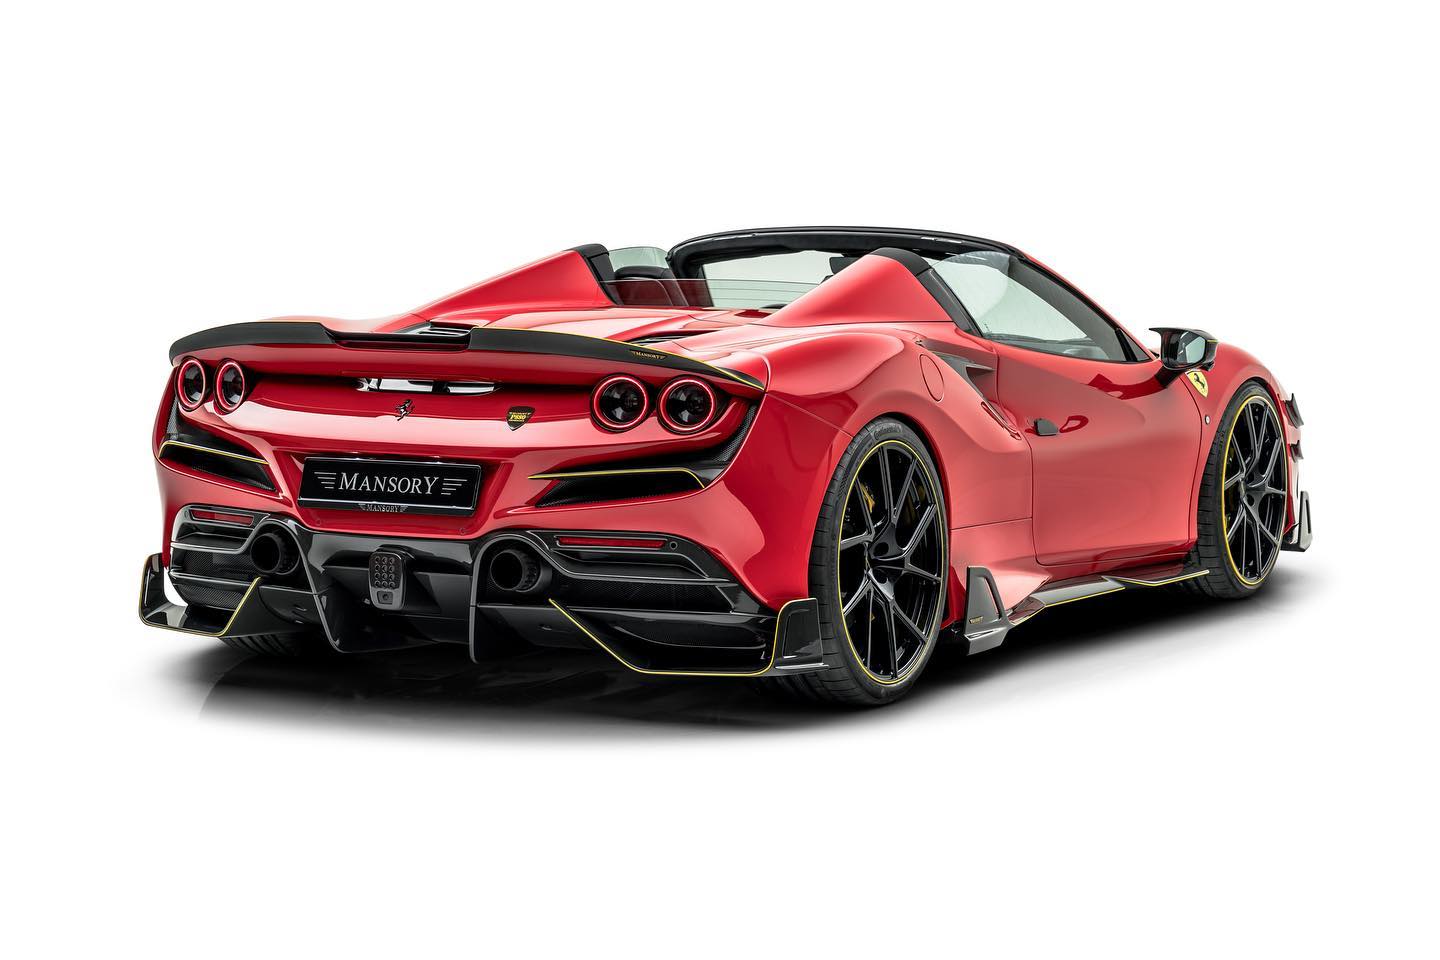 Mansory says this Ferrari F8 Spider is a 'one of one' creation